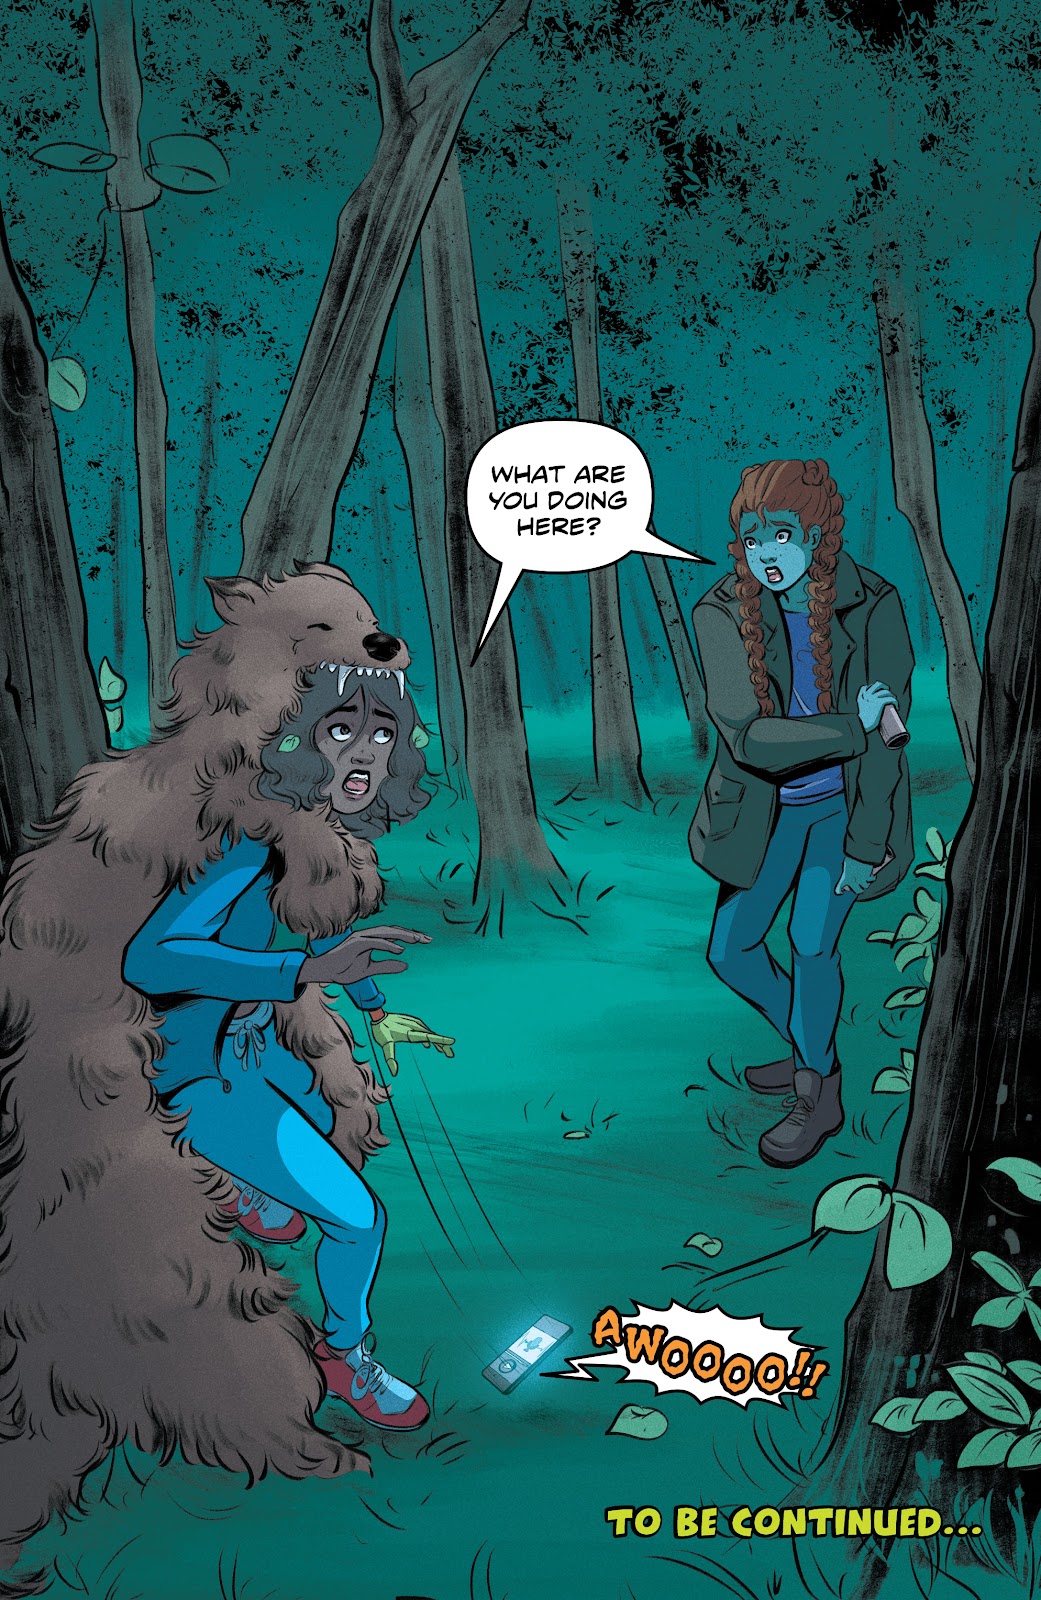 Goosebumps: Secrets of the Swamp issue 4 - Page 22